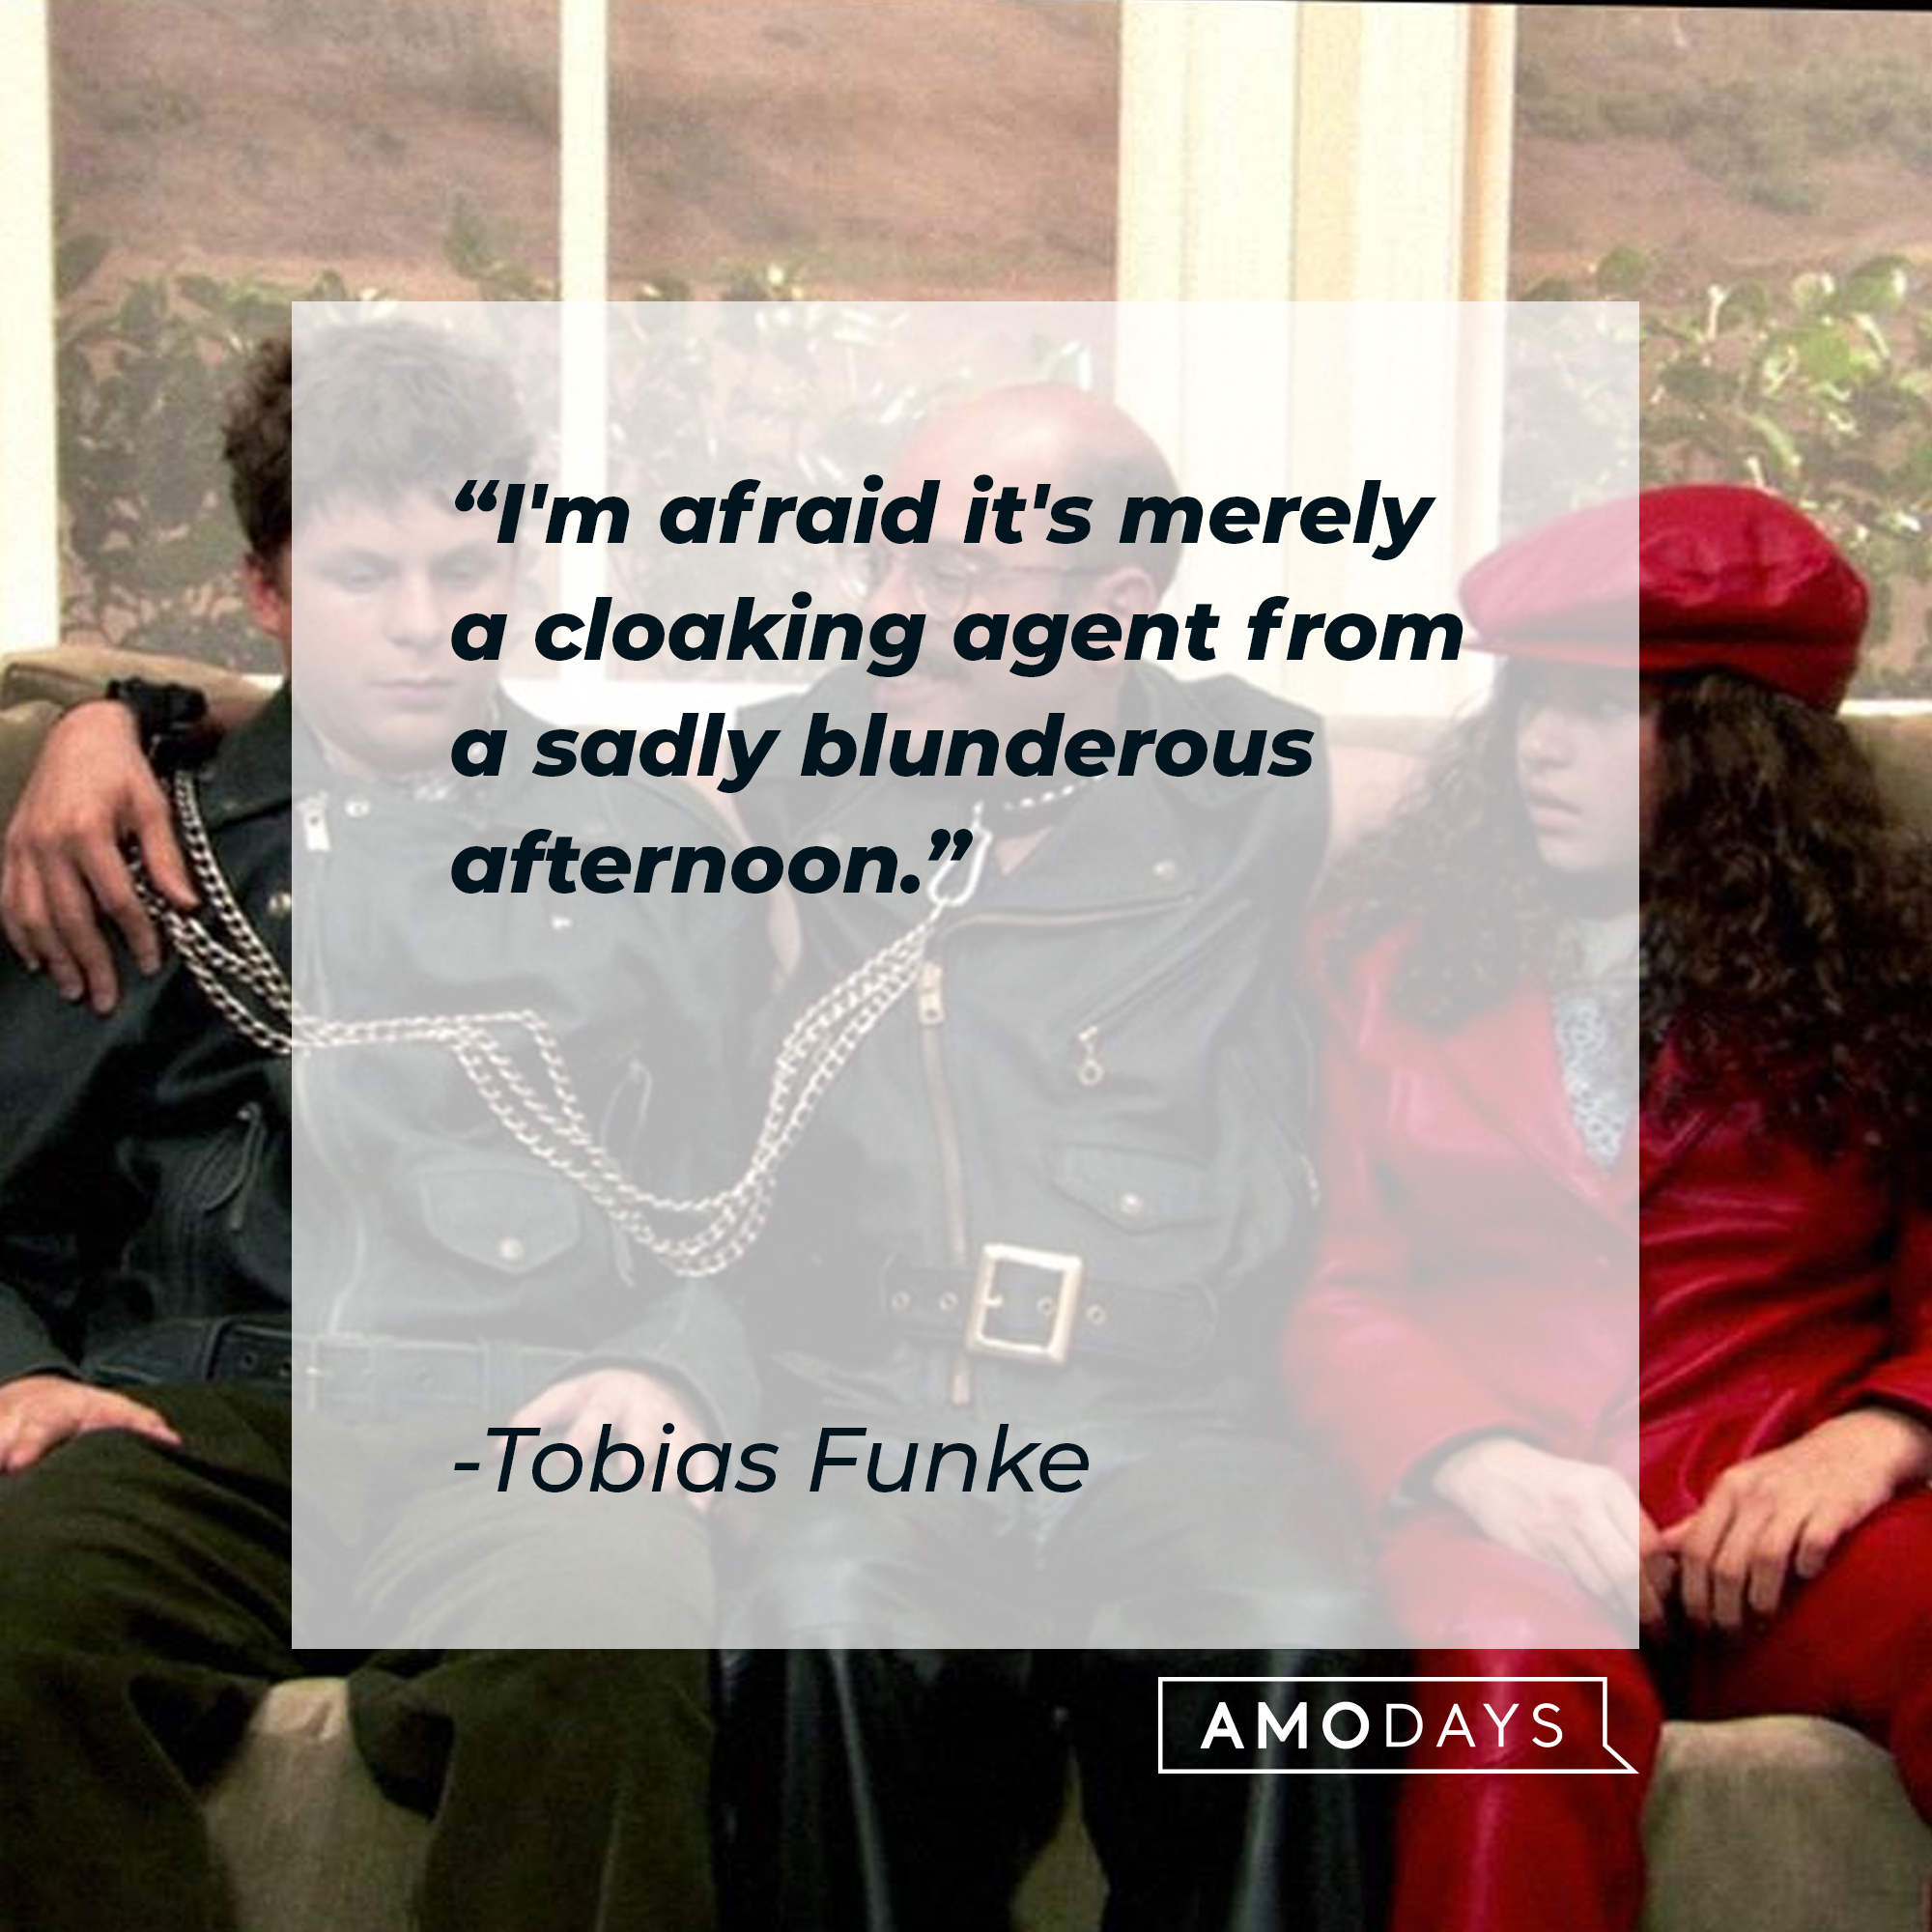 Tobias Funke's quote: "I'm afraid it's merely a cloaking agent from a sadly blunderous afternoon." | Source: Facebook.com/ArrestedDevelopment